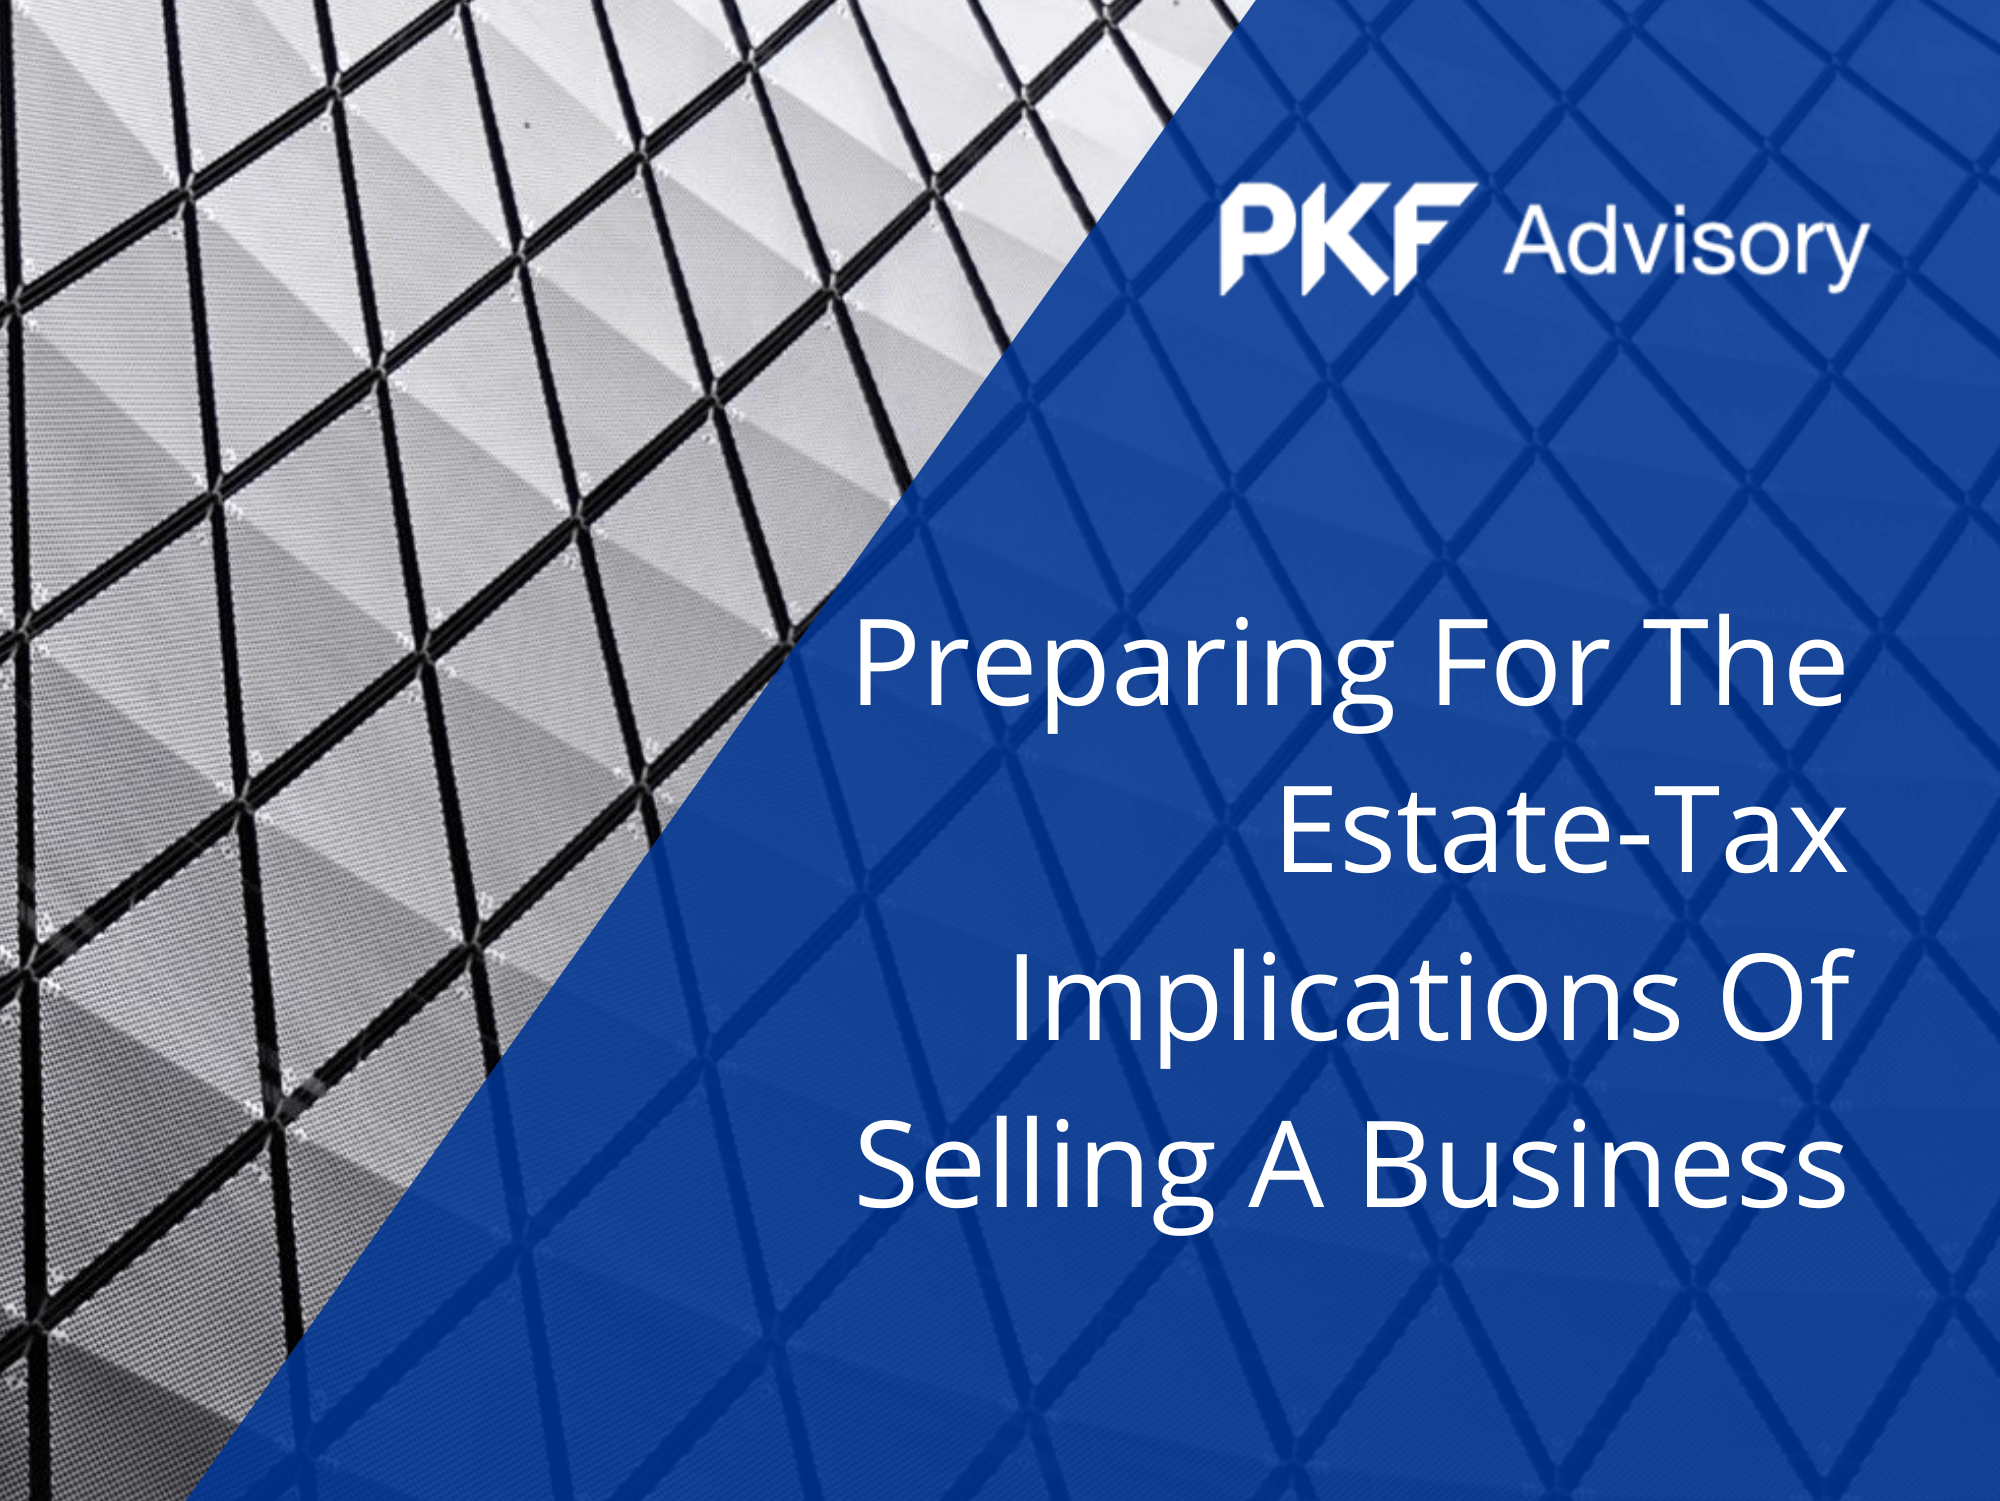 Preparing for the Estate Tax Implications of Selling a Business